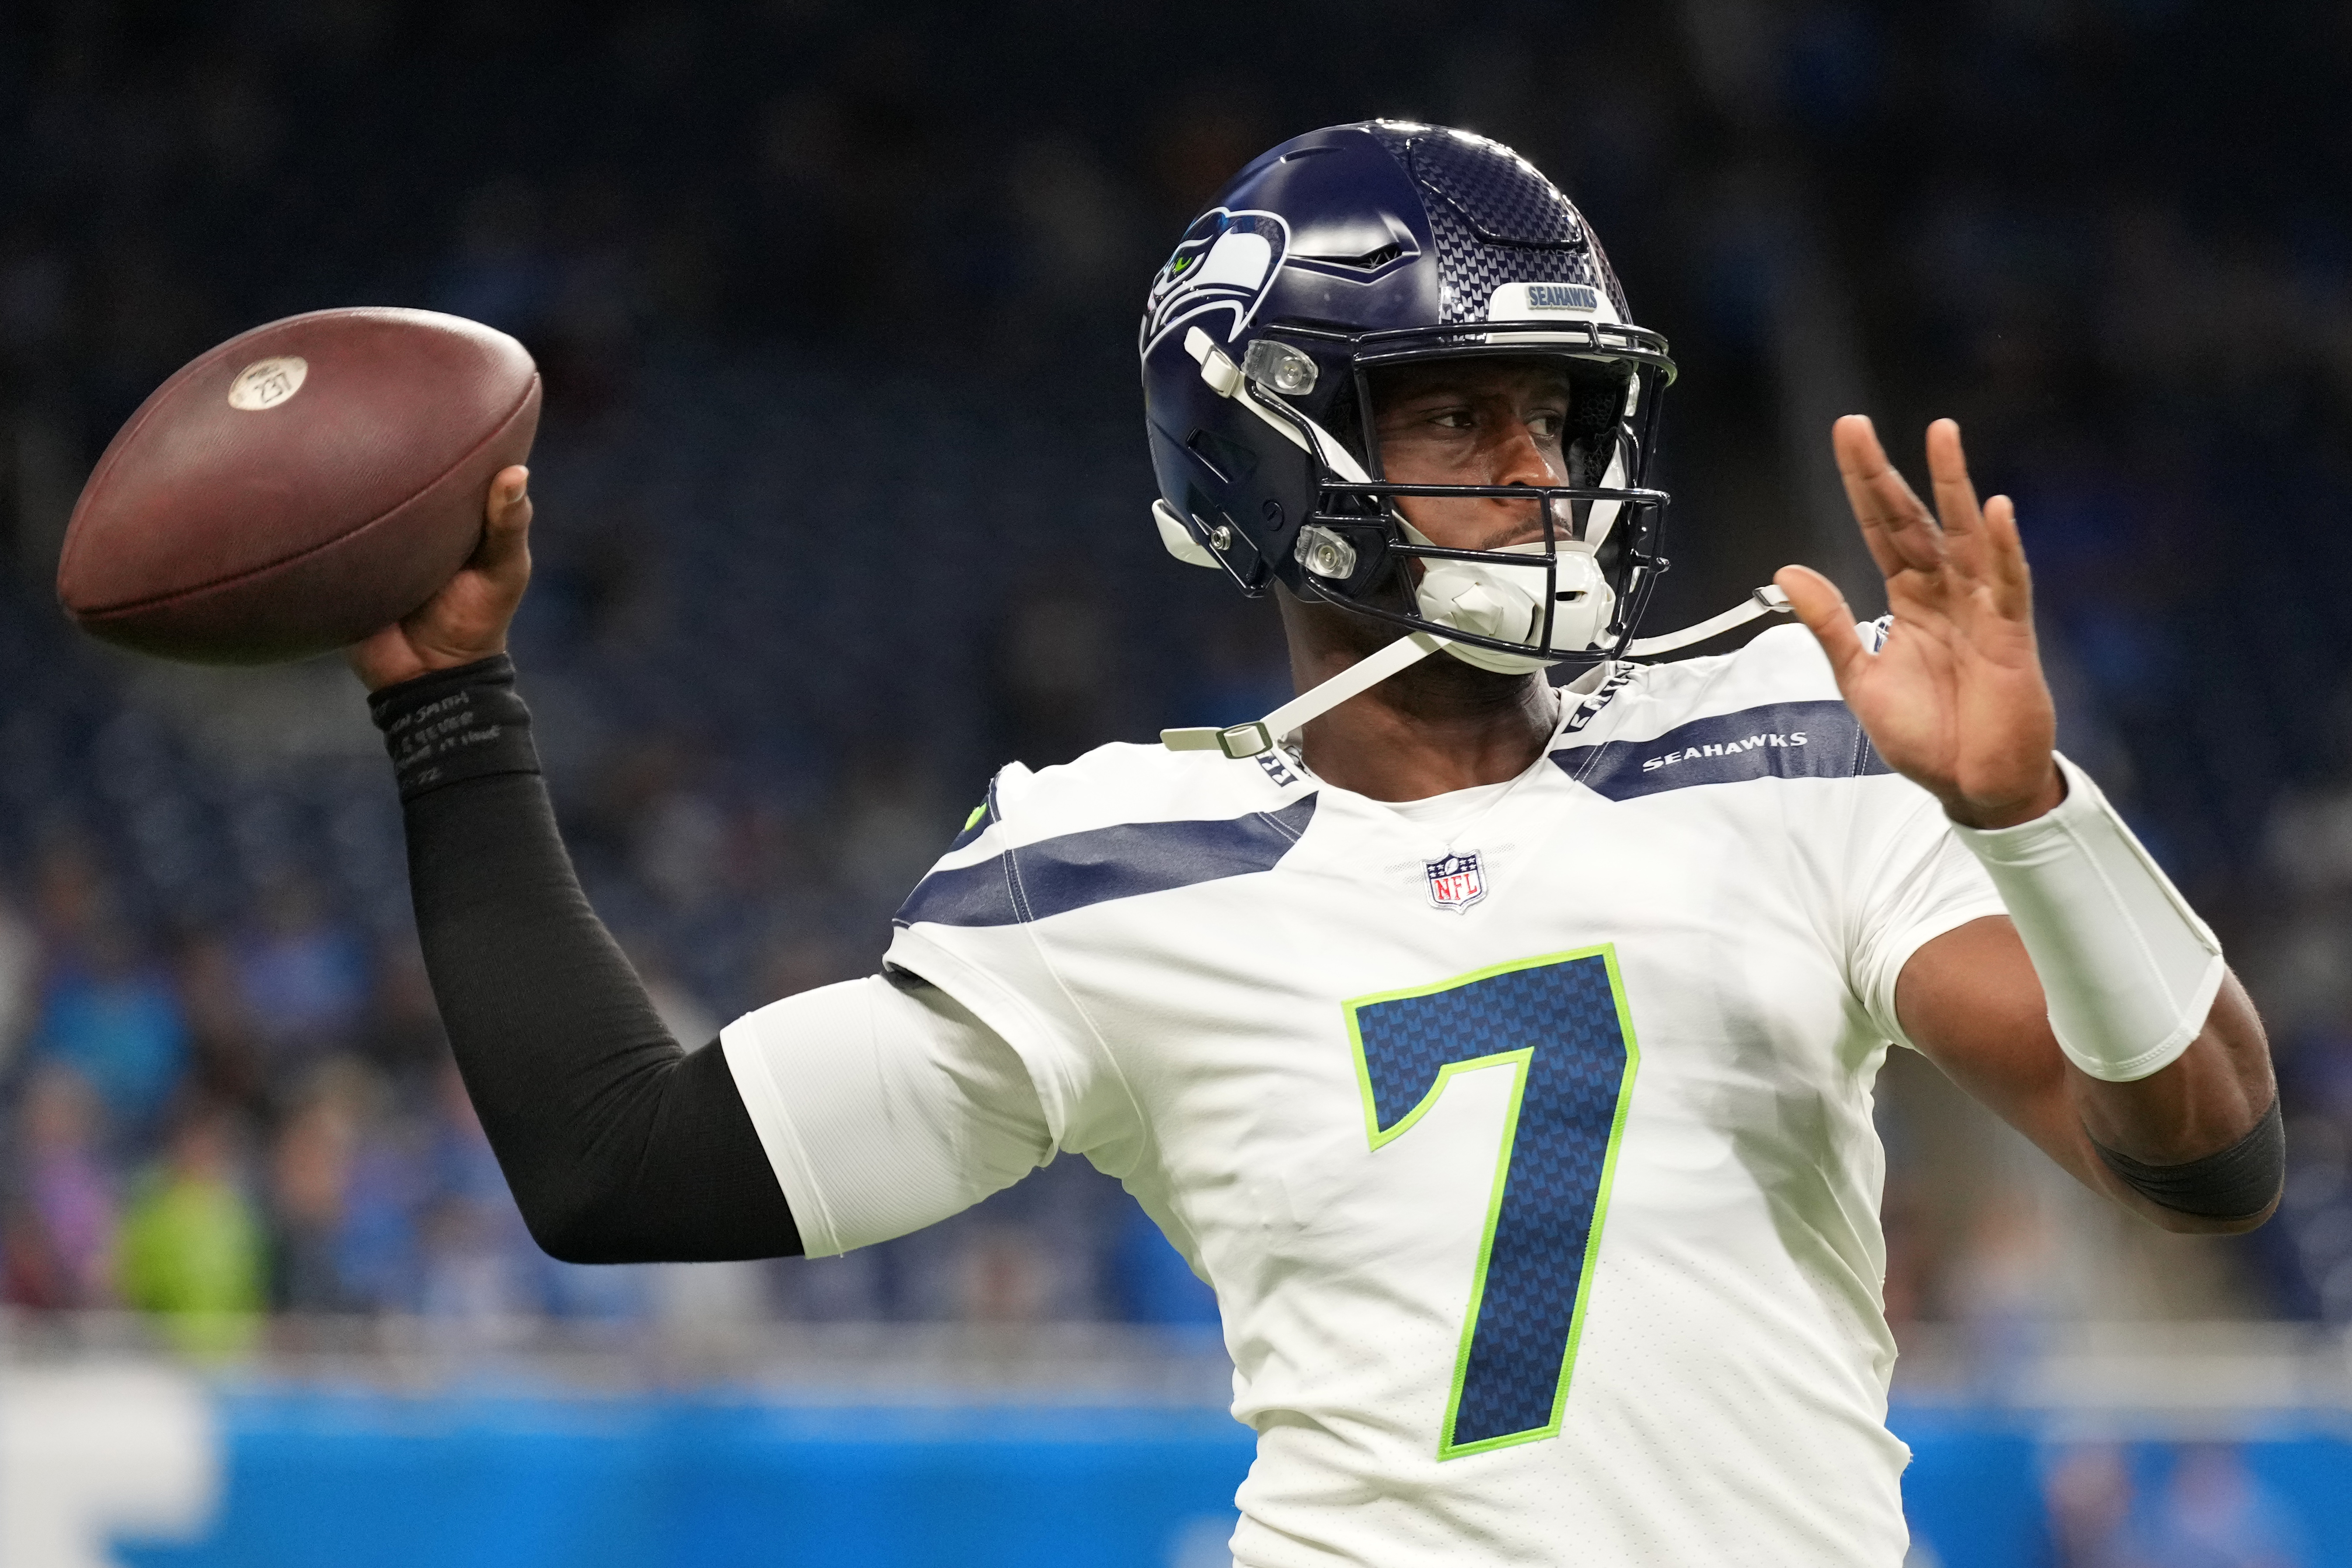 Geno Smith #7 of the Seattle Seahawks warms up before the game against the Detroit Lions at Ford Field on October 02, 2022 in Detroit, Michigan.